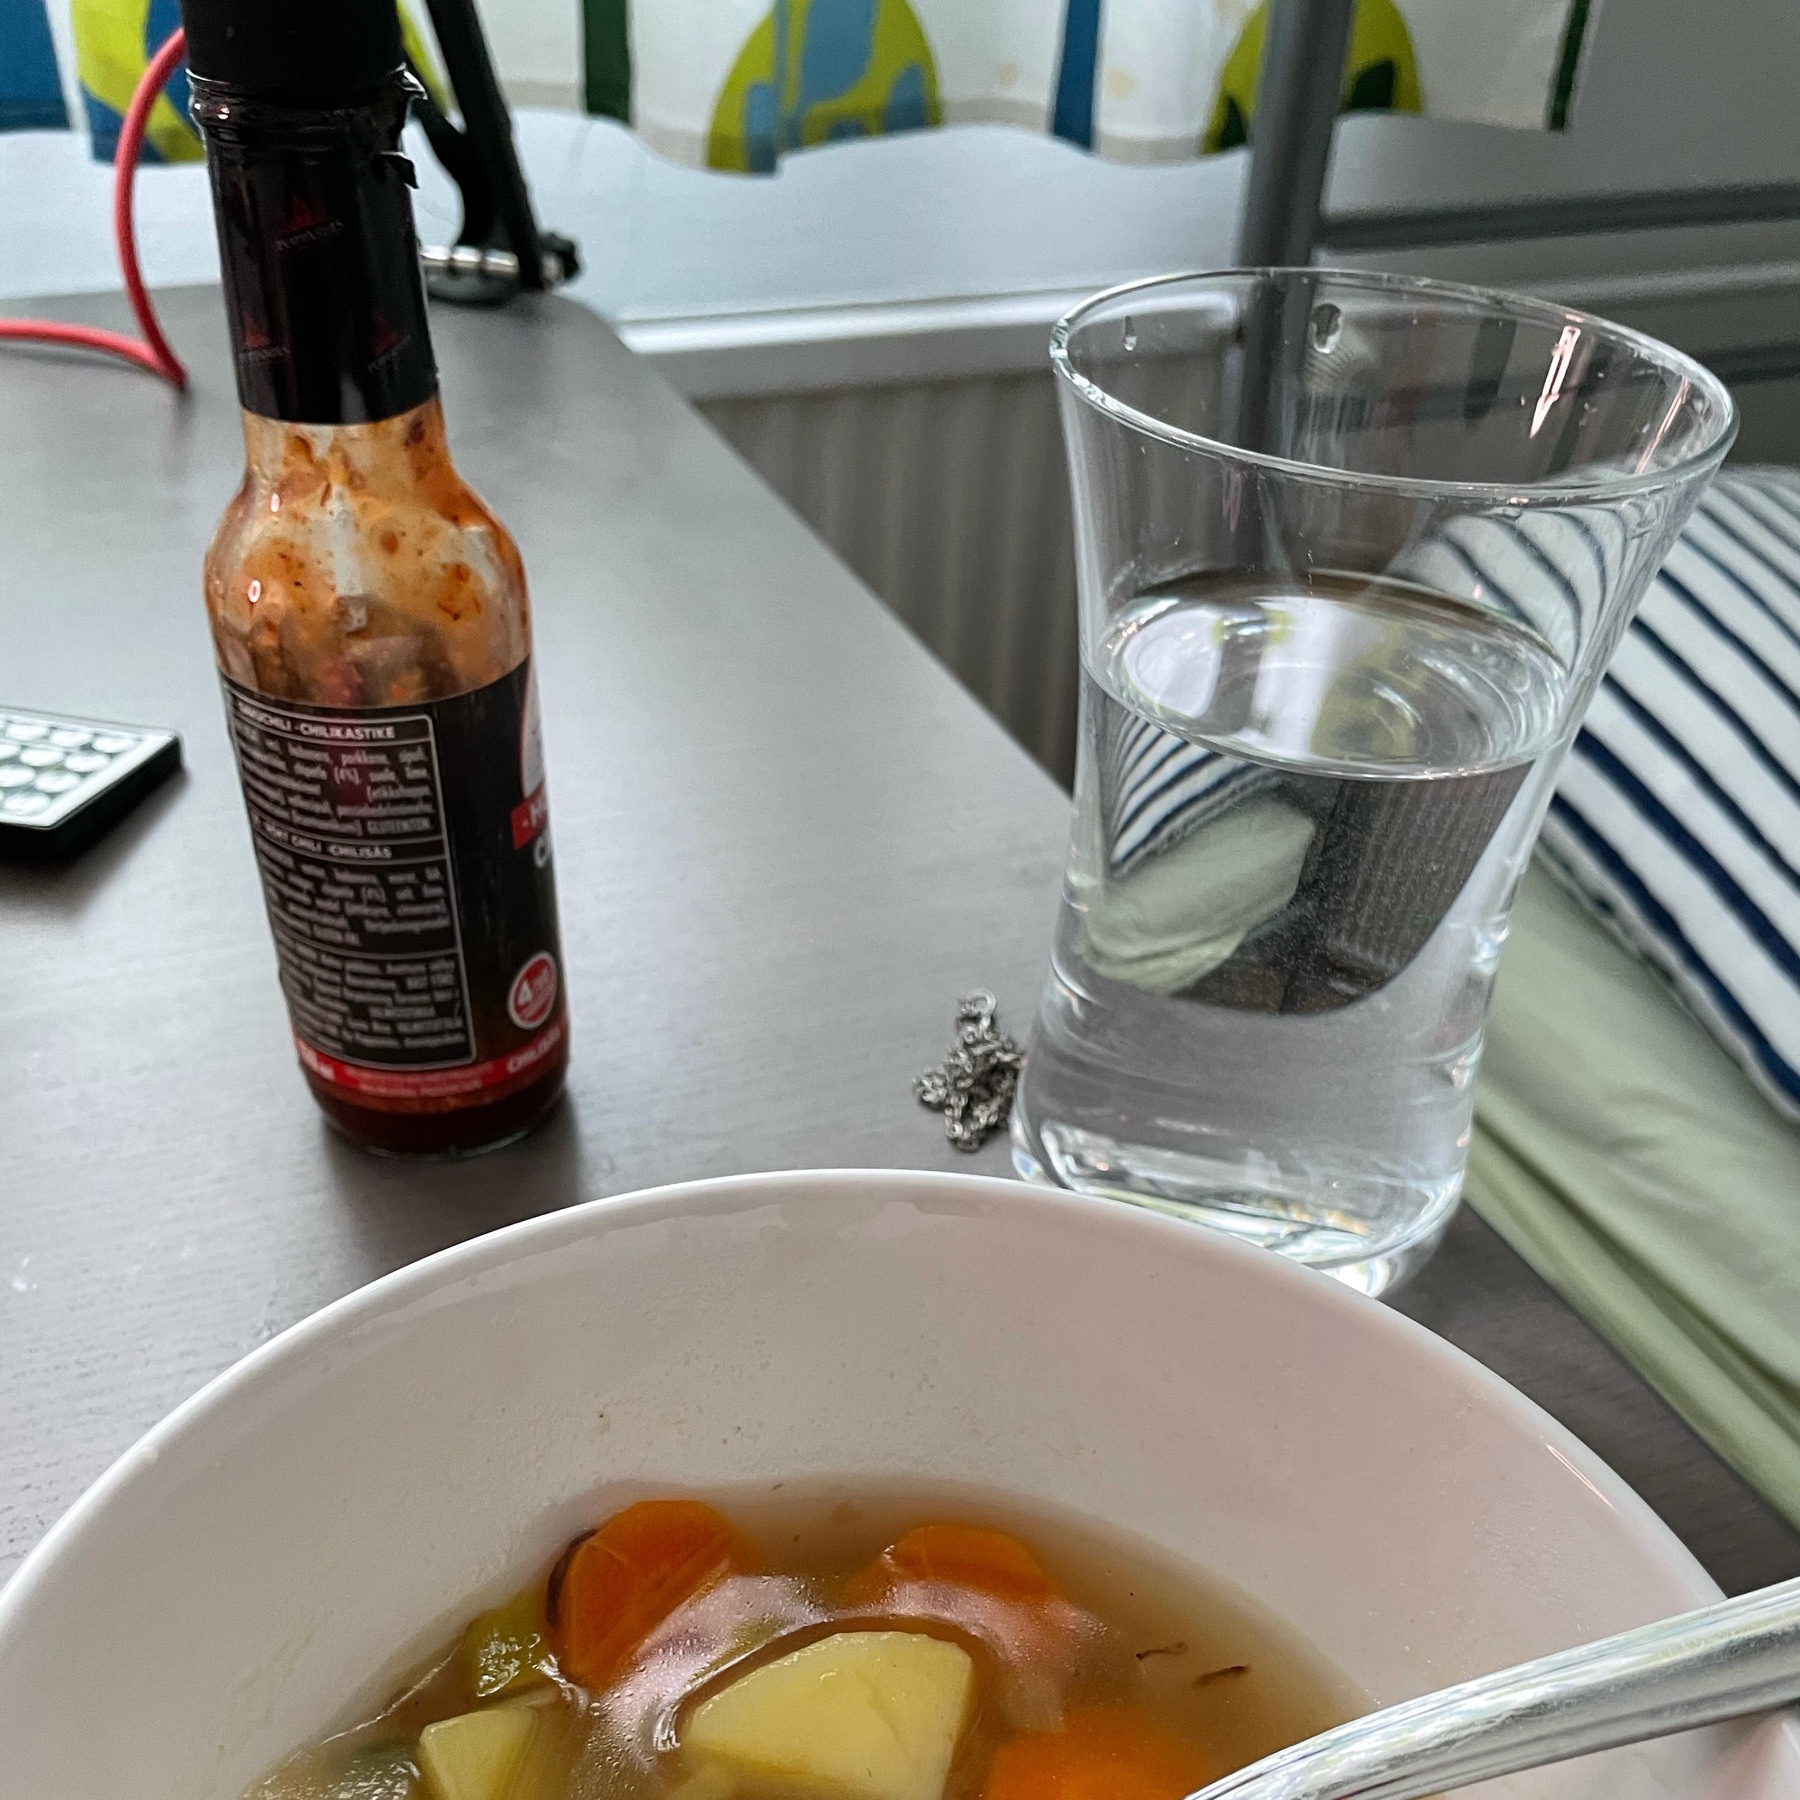 lentil soup in a bowl, hot sauce bottle, big glass of water on a computer desk